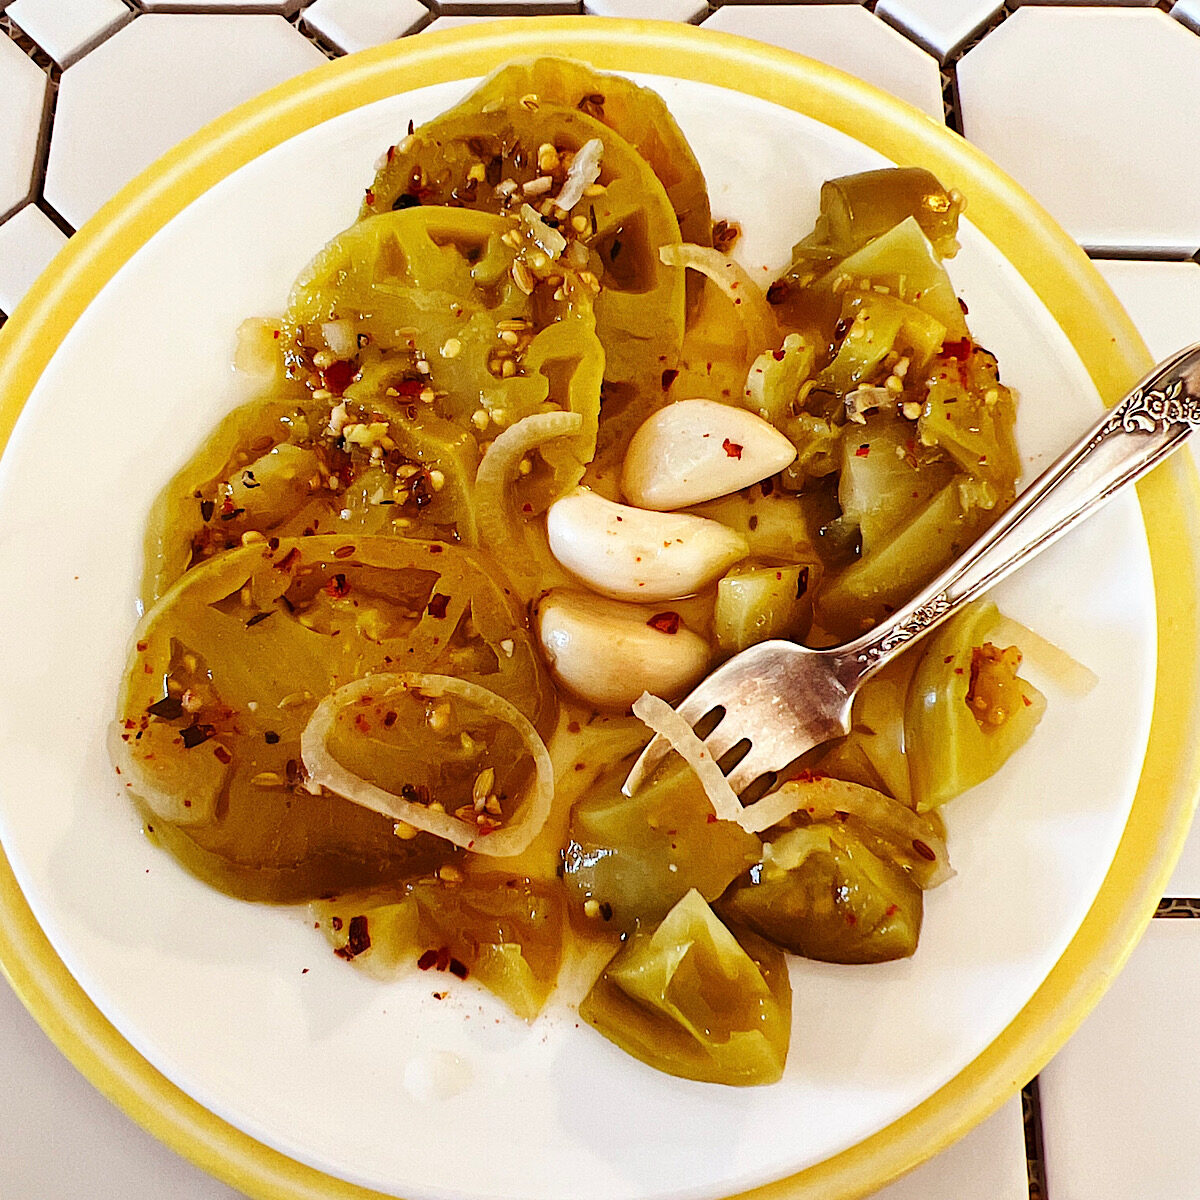 Quick green tomato pickles: sliced and cubed.